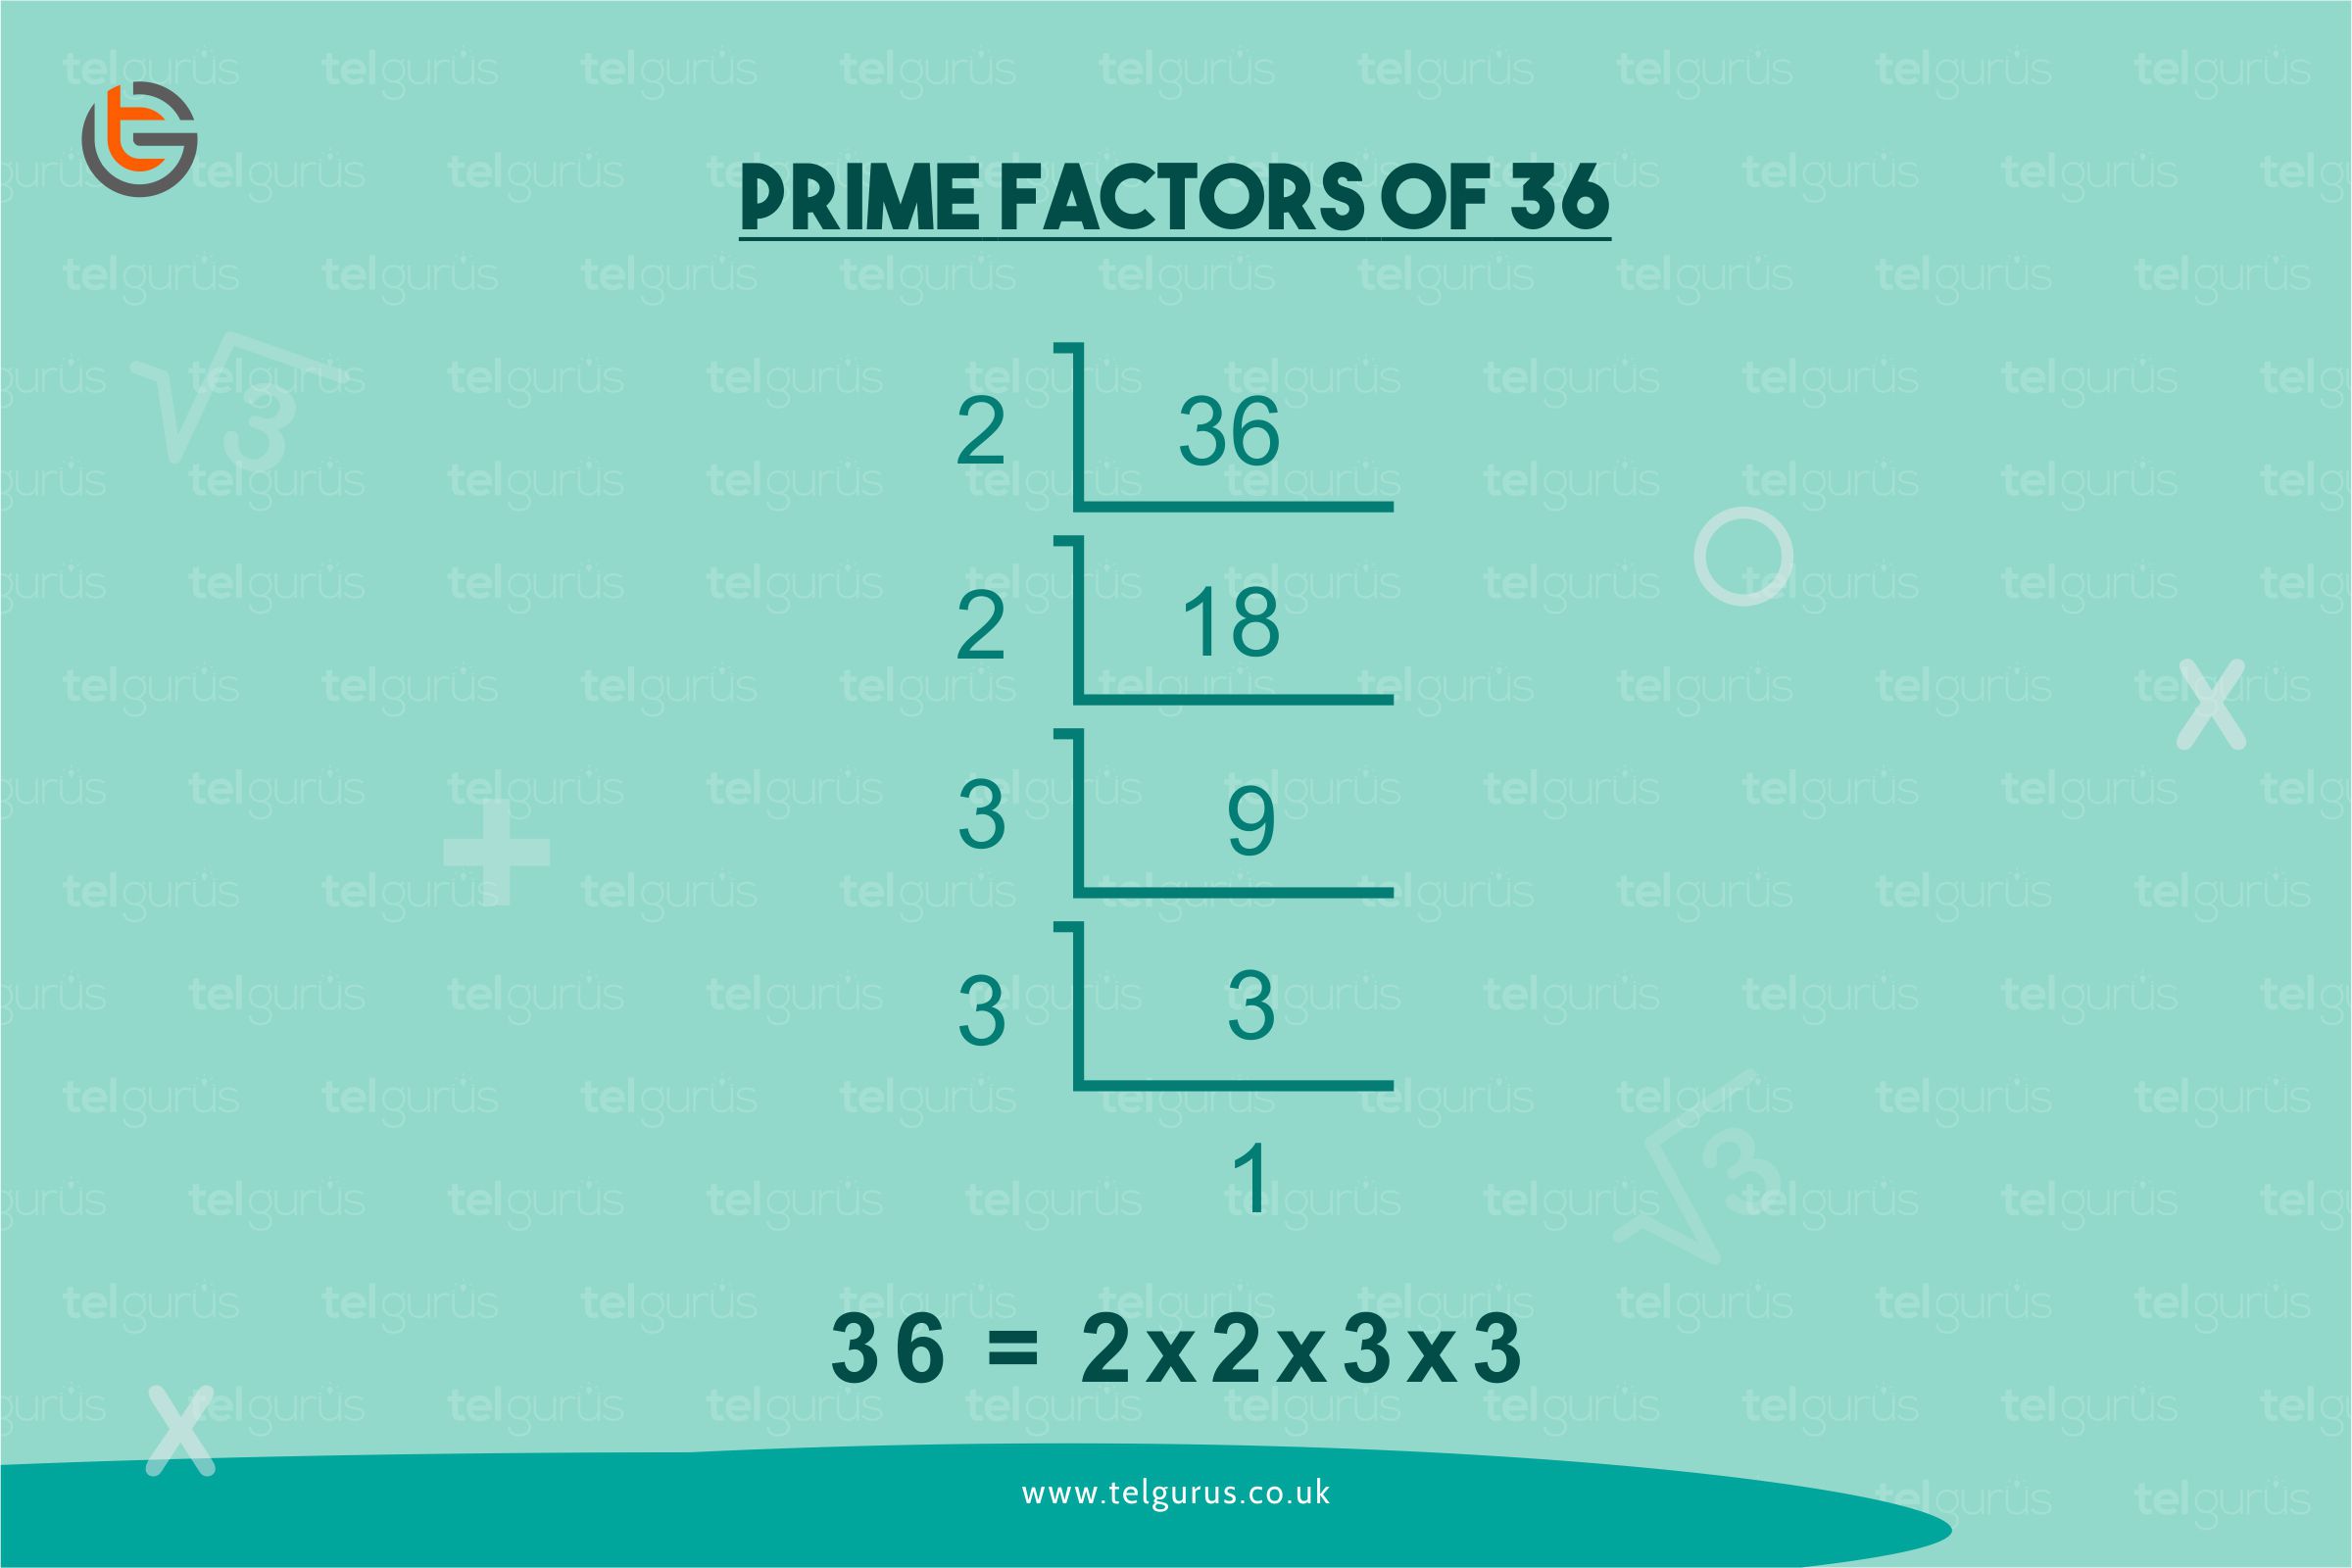 the number of factors of 36 is